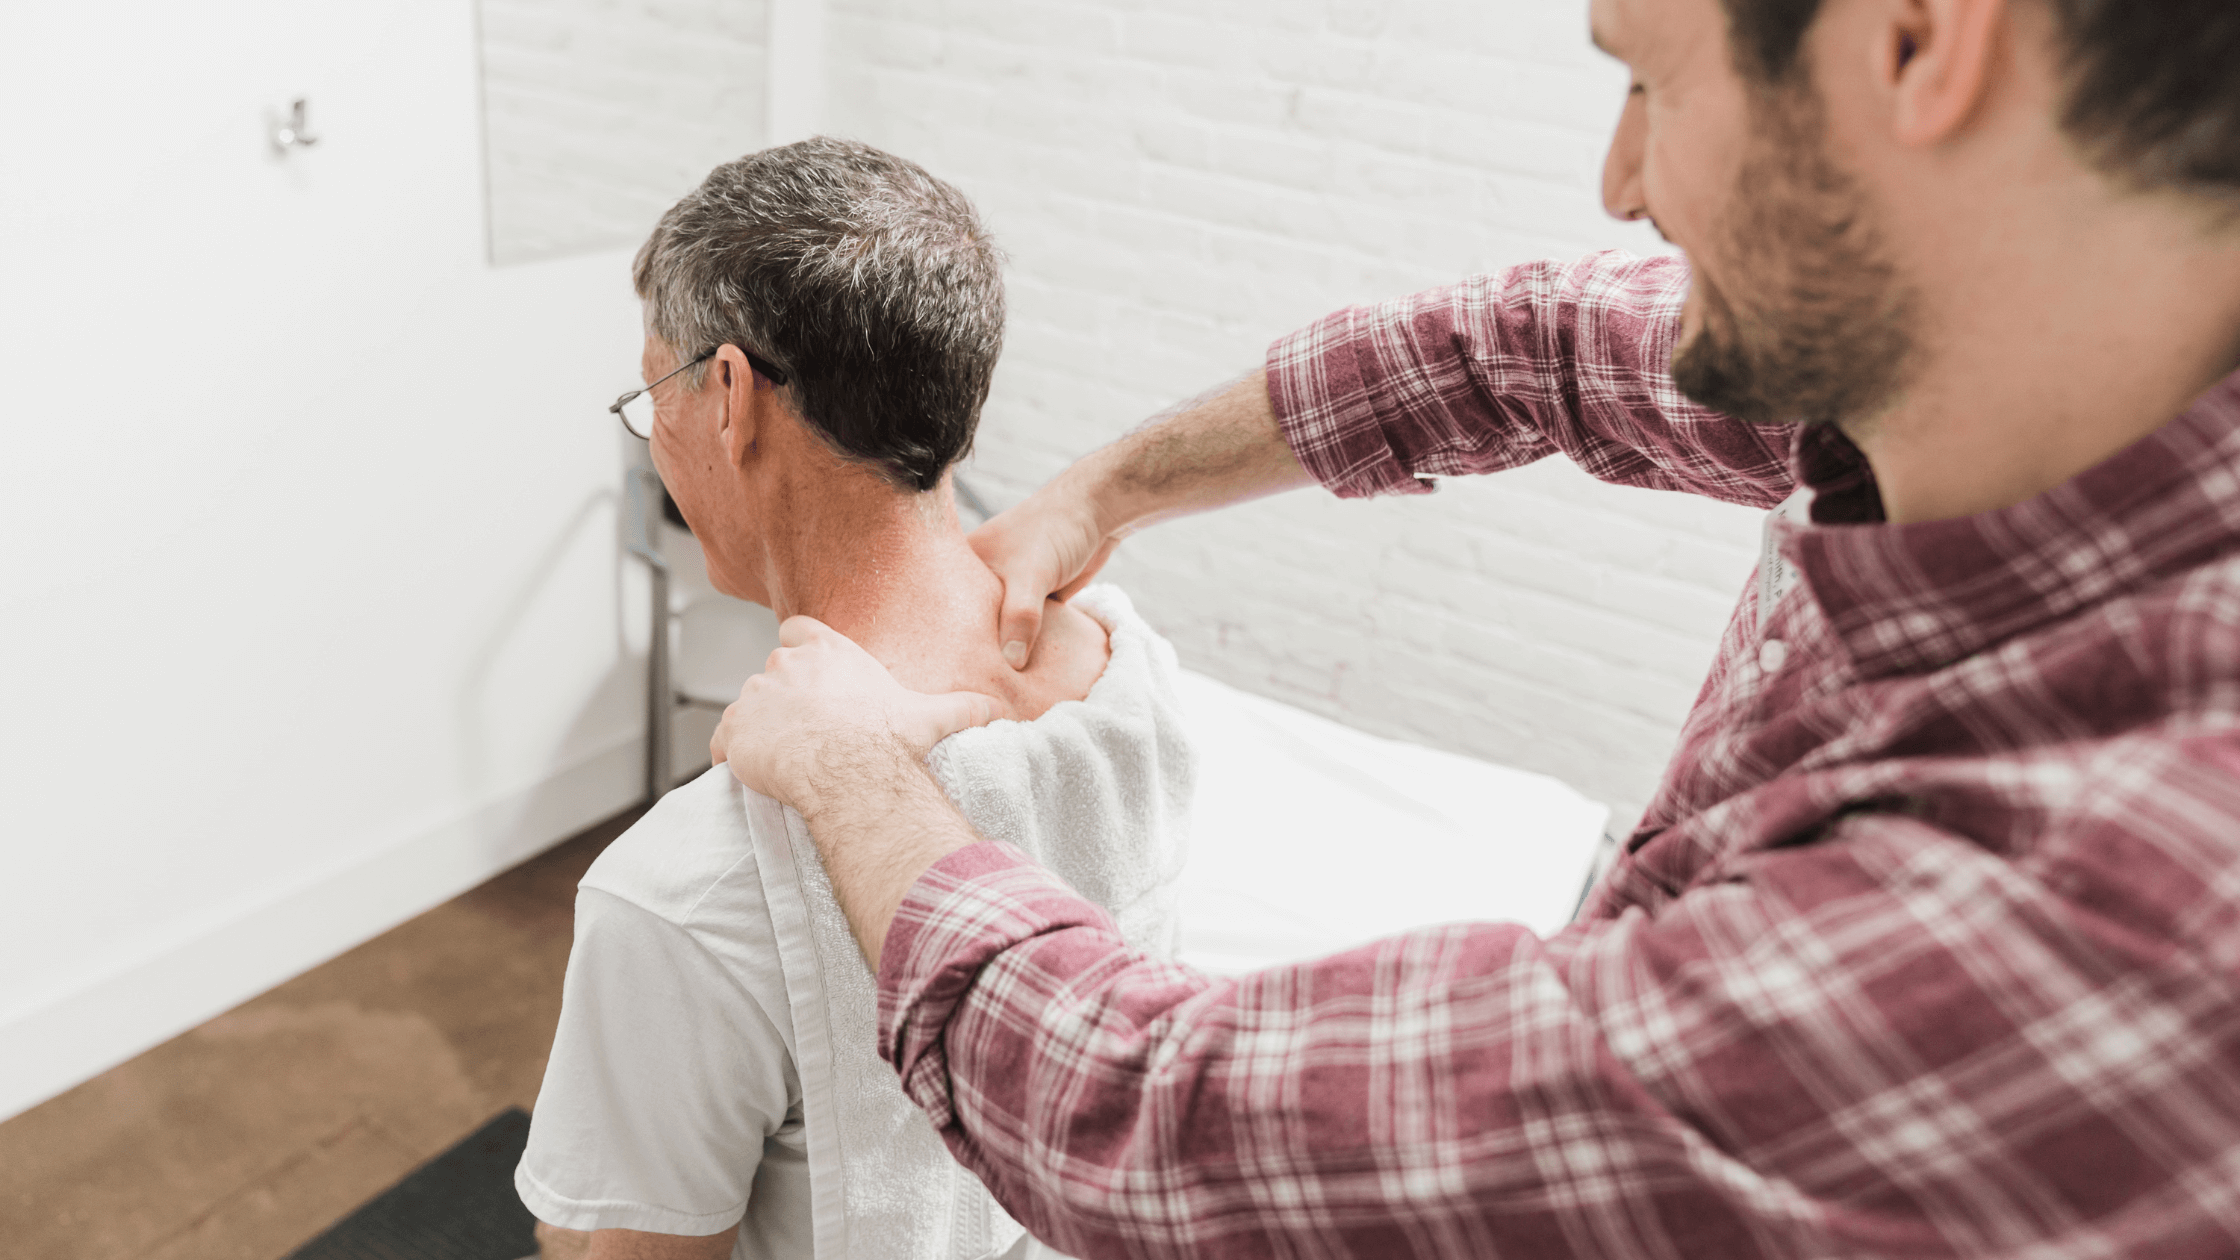 Deep Tissue, Swedish, or Shiatsu? Comparing Types of Massage With Physical Therapy